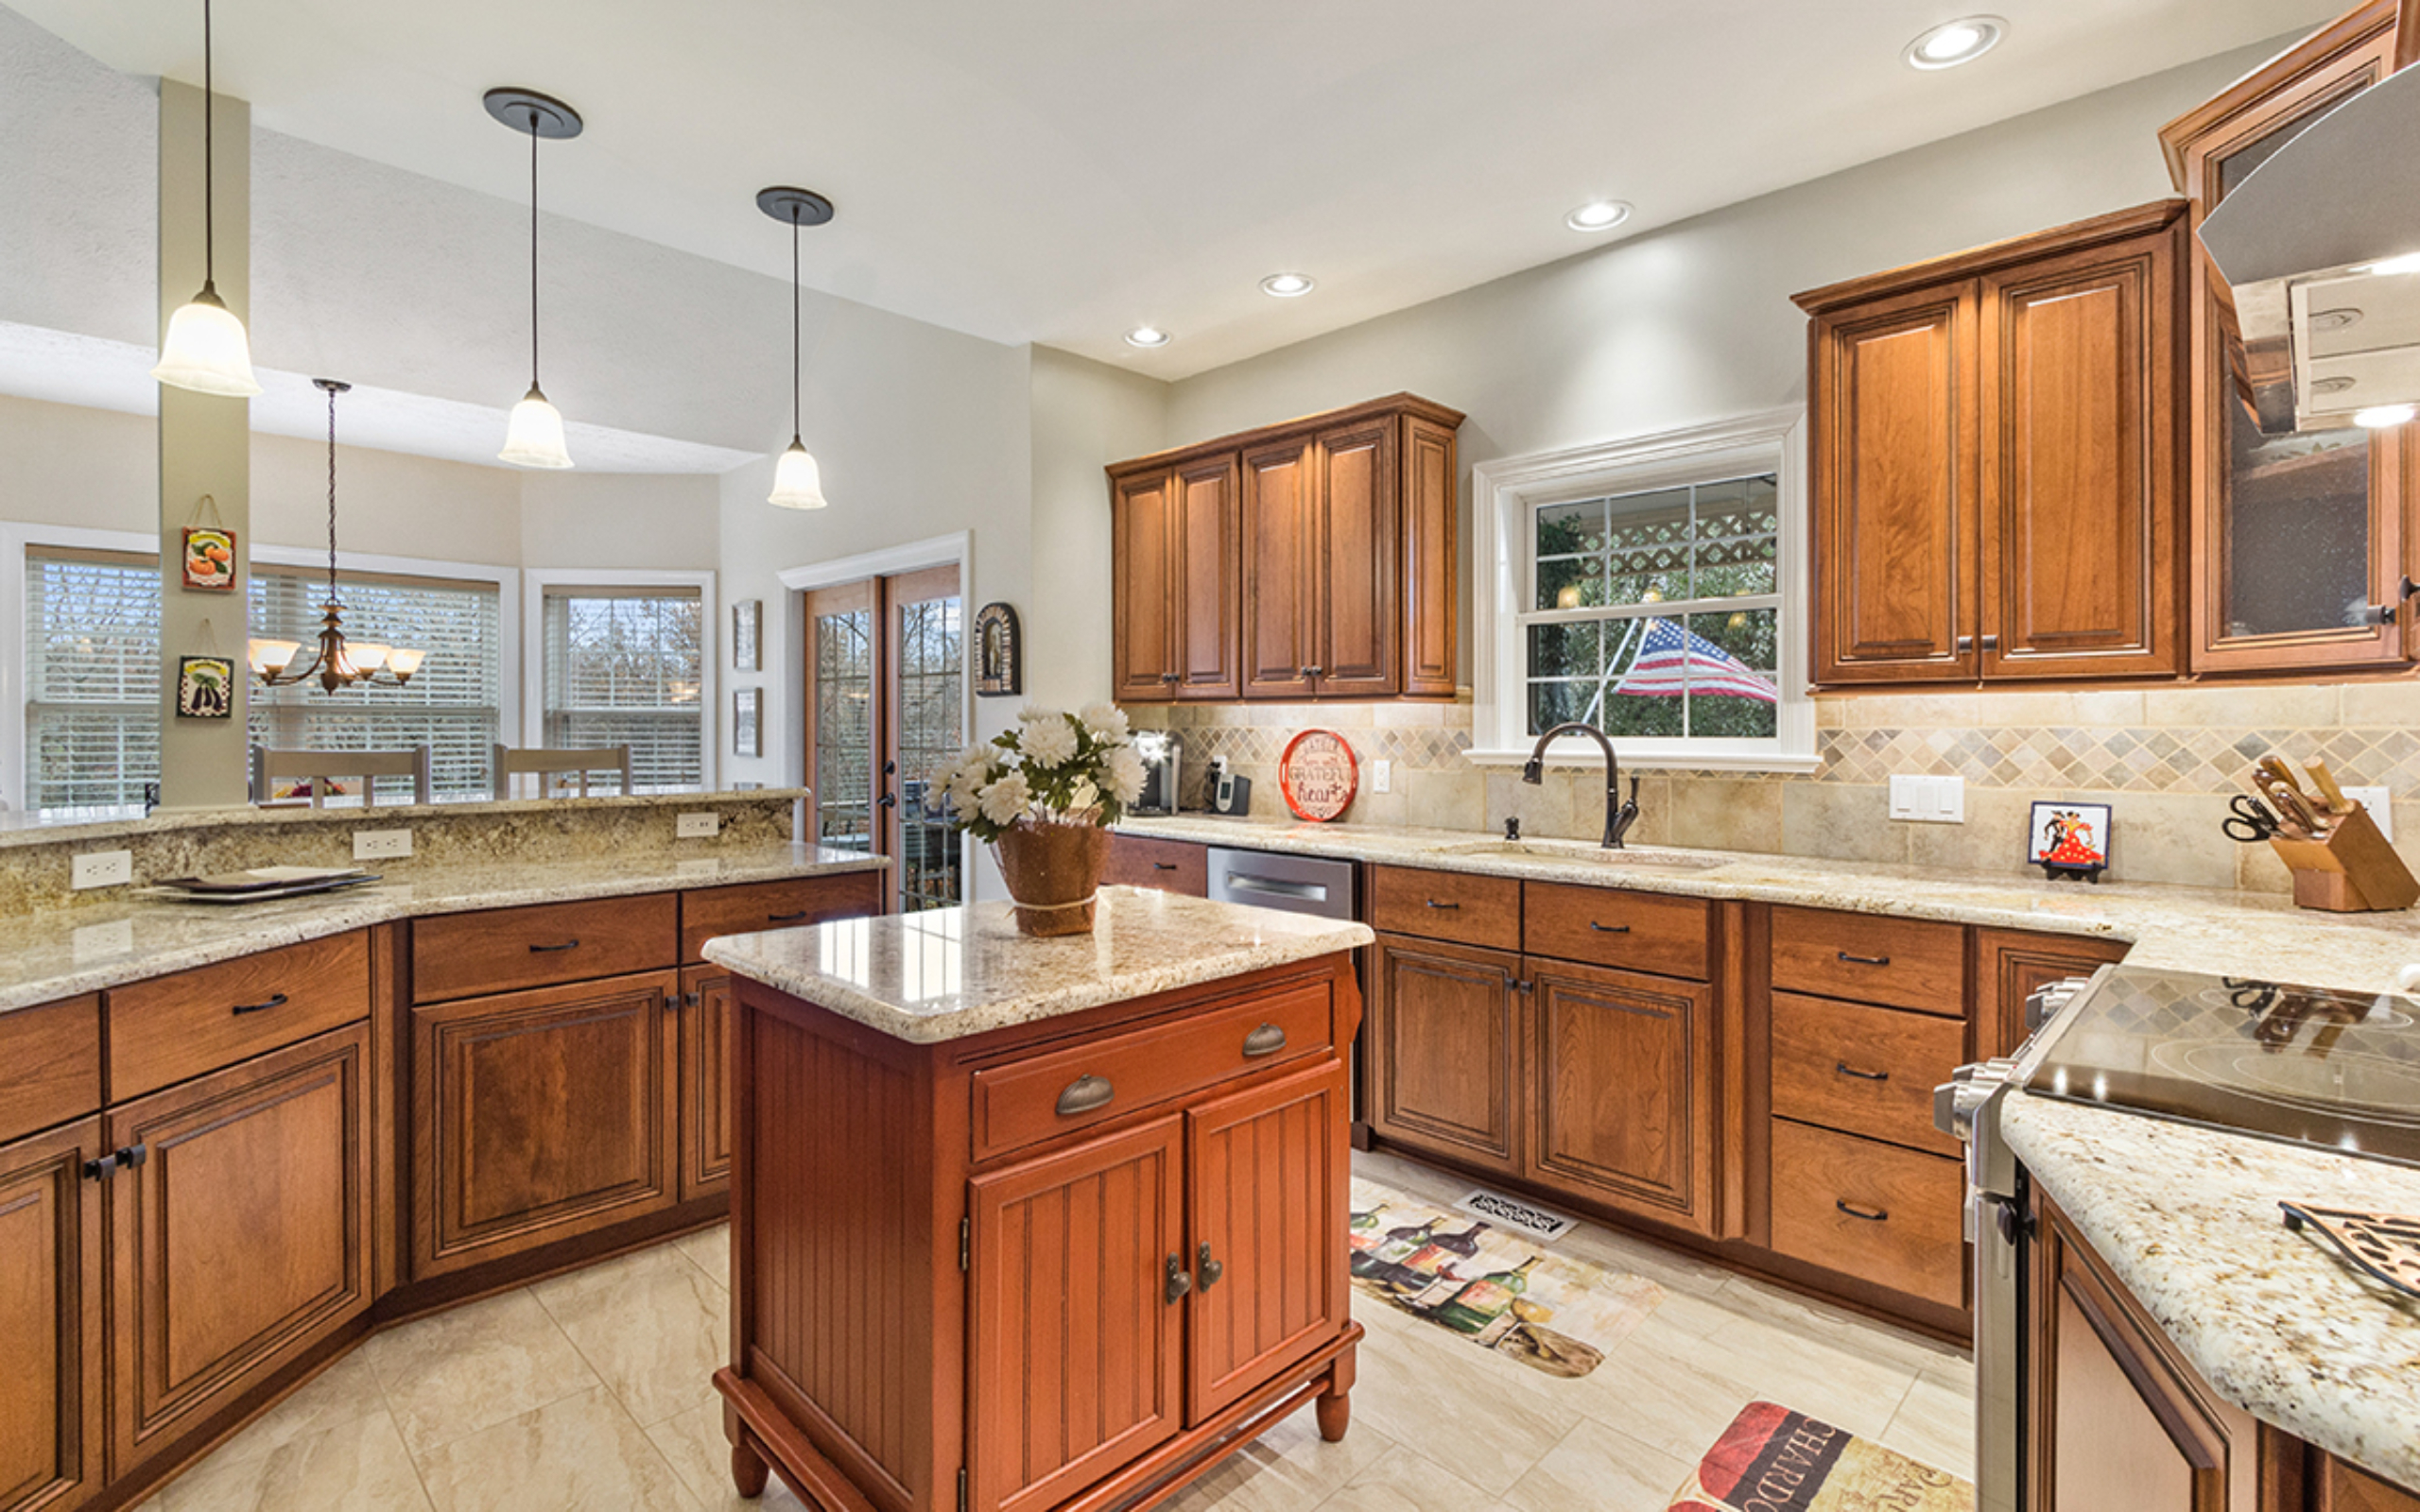 Hardwood maple kitchen cabinets and quartz countertop with island, refaced kitchen with open floor plan in Wilmington, DE by Lowe’s National Refacing Systems.